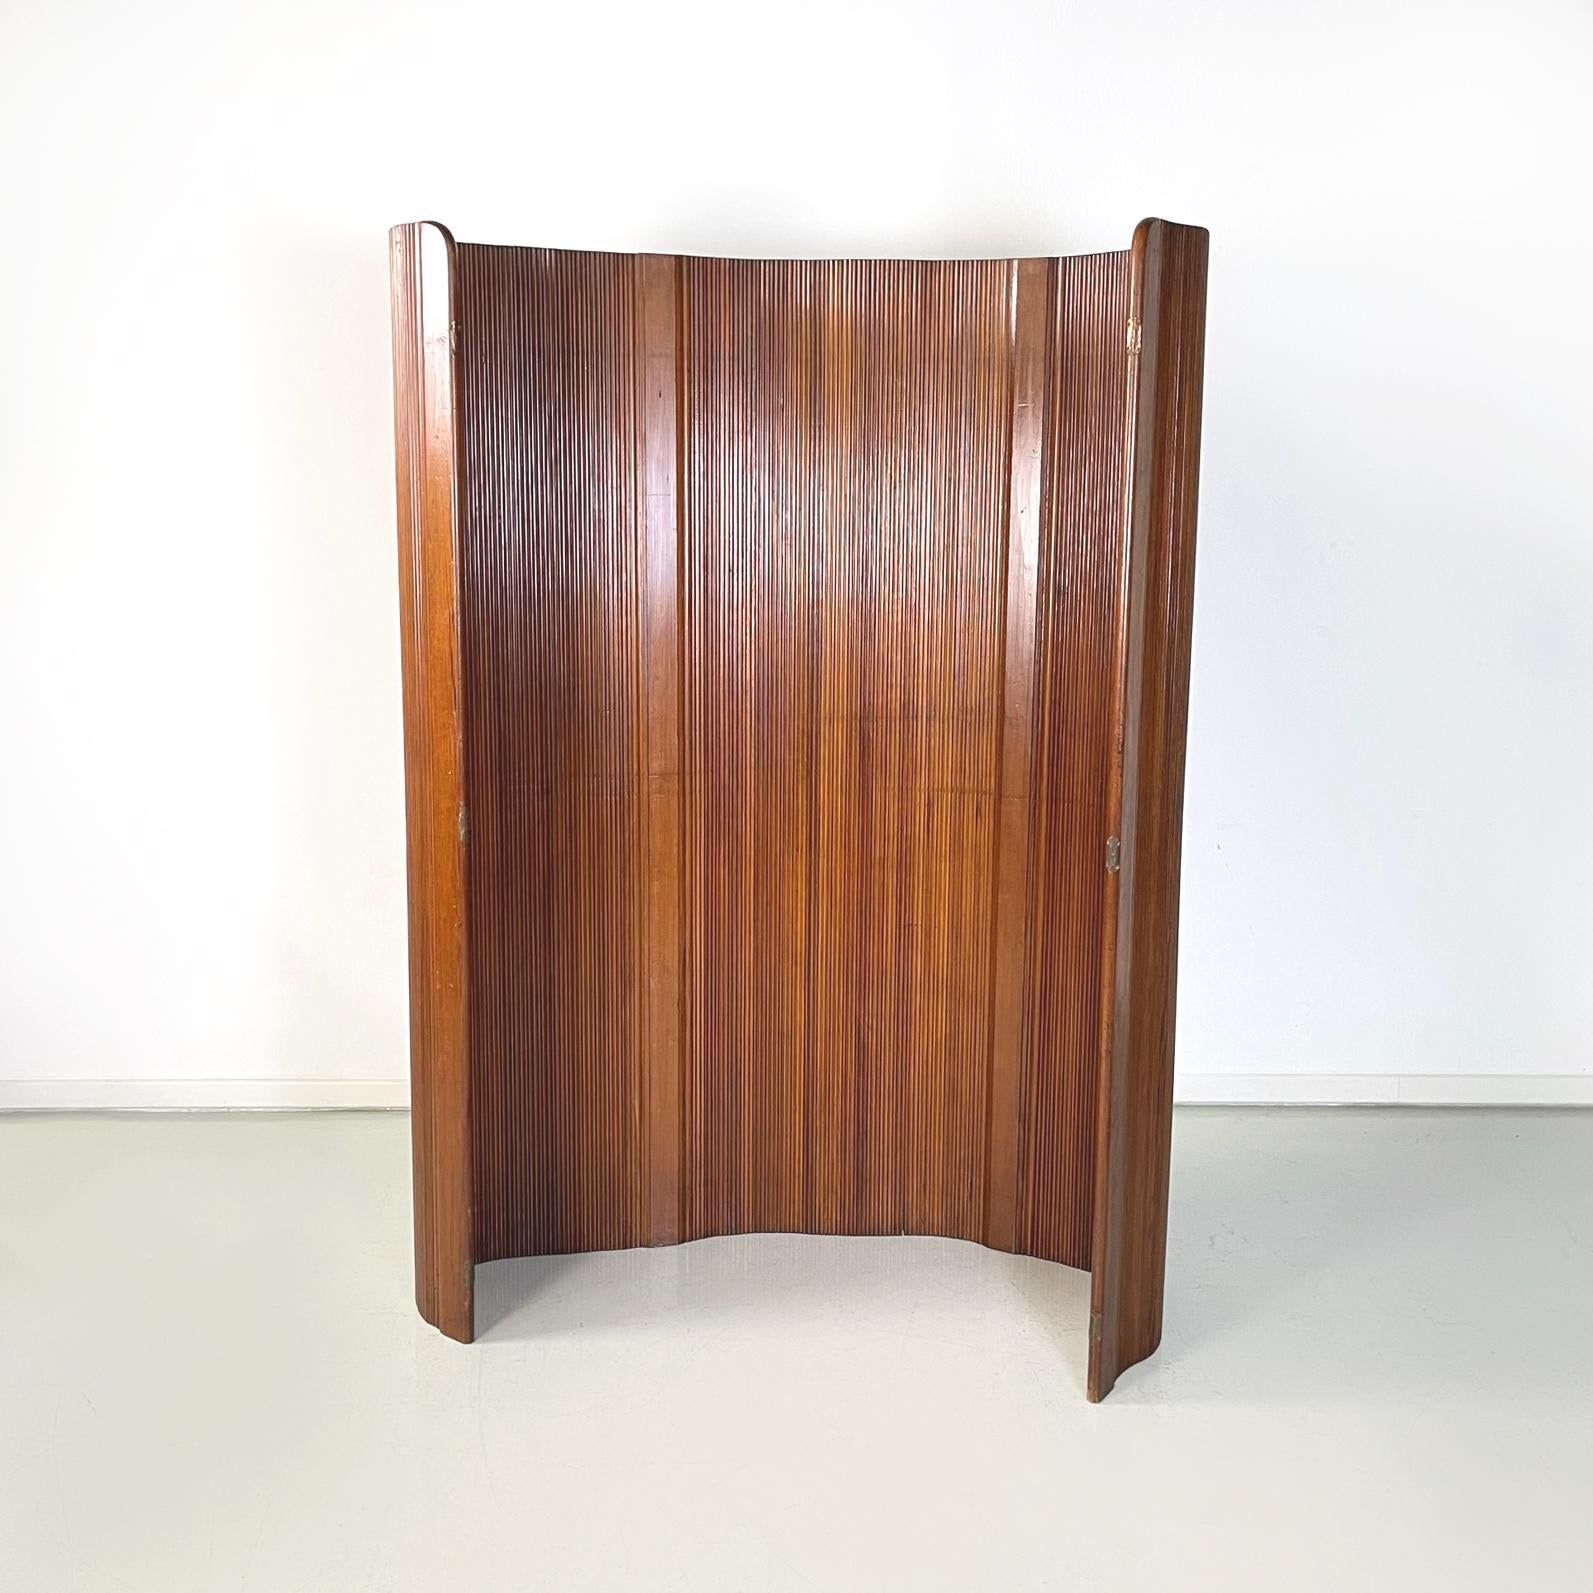 French Midcentury Art Deco Self-Supporting Wooden Screen by Baumann, 1950s In Good Condition For Sale In MIlano, IT